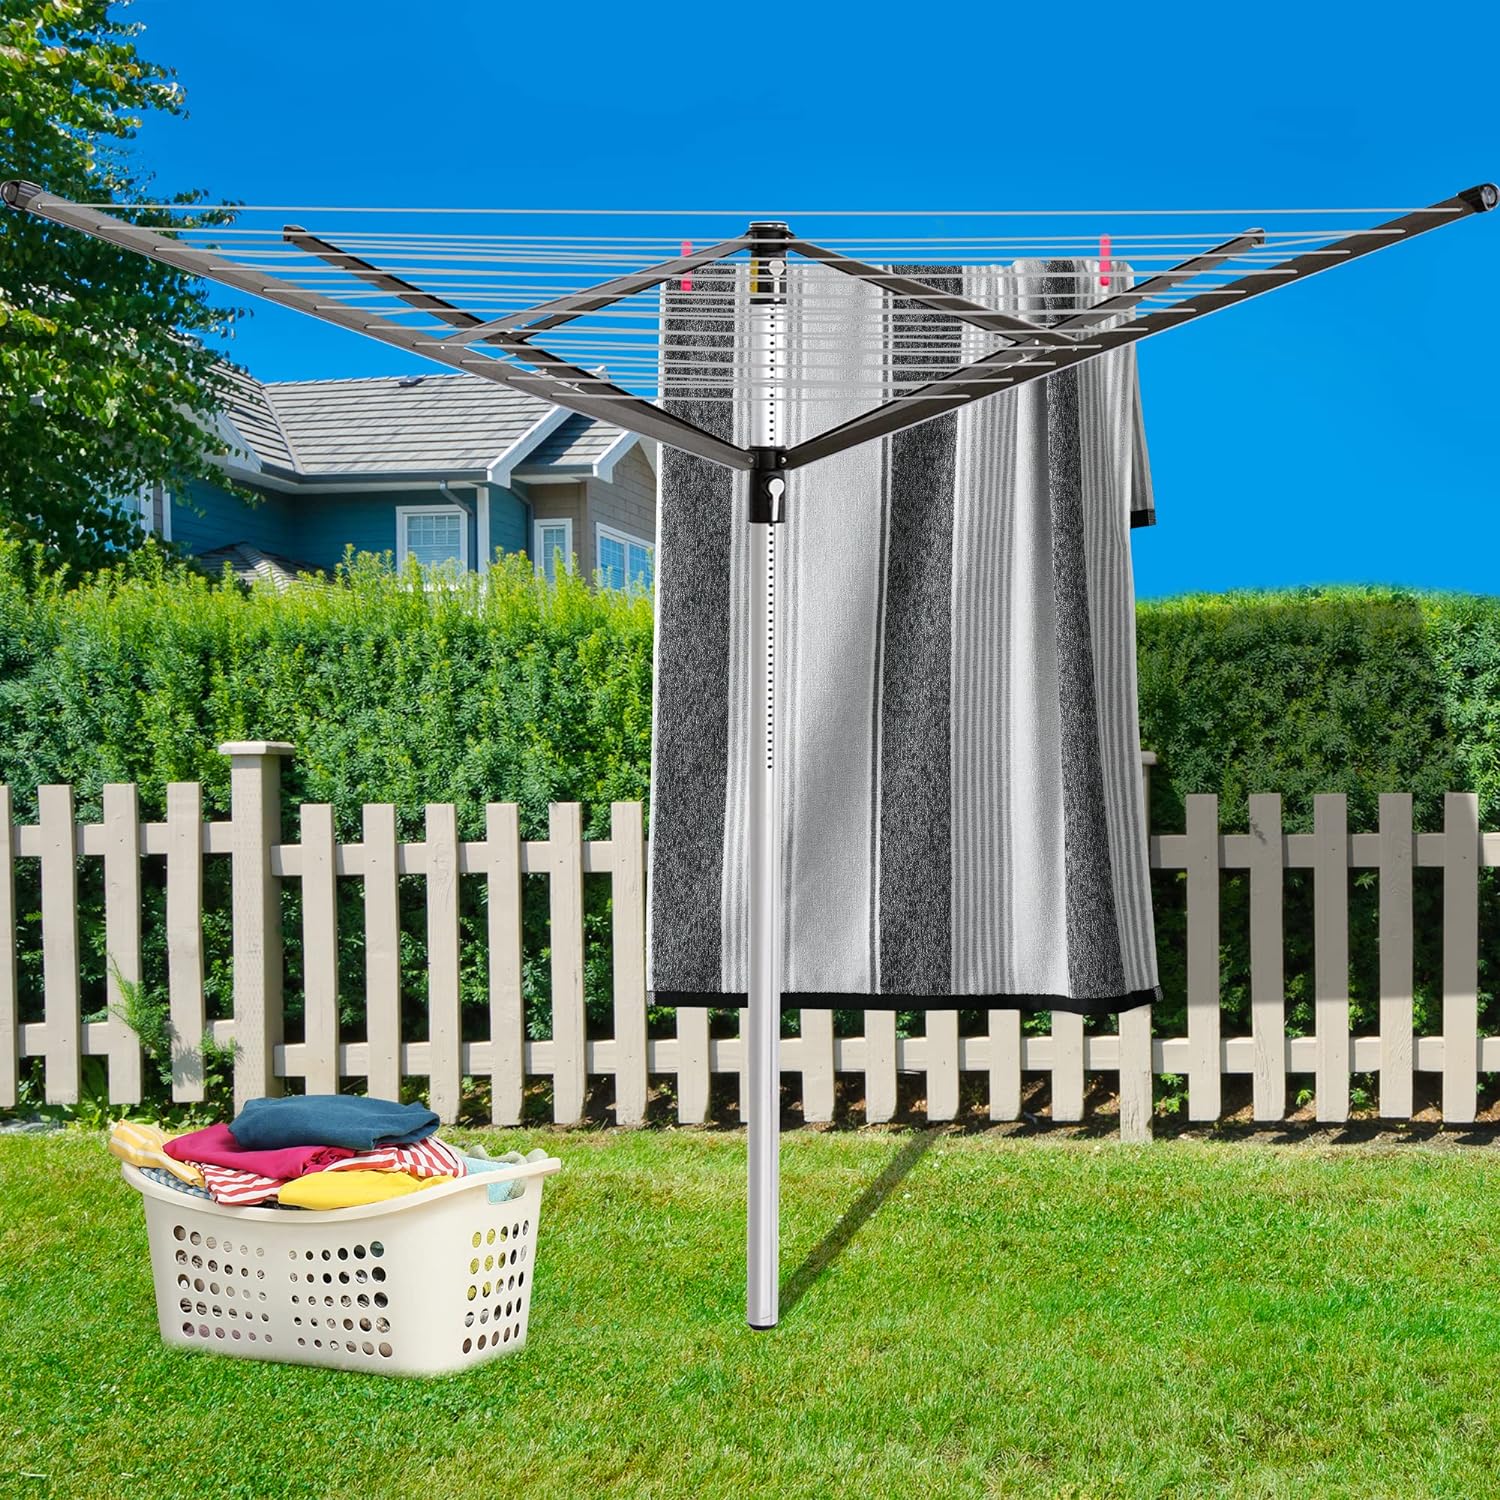 https://bigbigmart.com/wp-content/uploads/2023/12/Bizvalue-Clothesline-Outdoor-Rotary-Dryer-4-Arms-Foldable-Heavy-Duty-Height-Adjustable-Clothes-Drying-Rack-196FT-Drying-Space-Hang-Wet-or-Dry-Laundry4.jpg